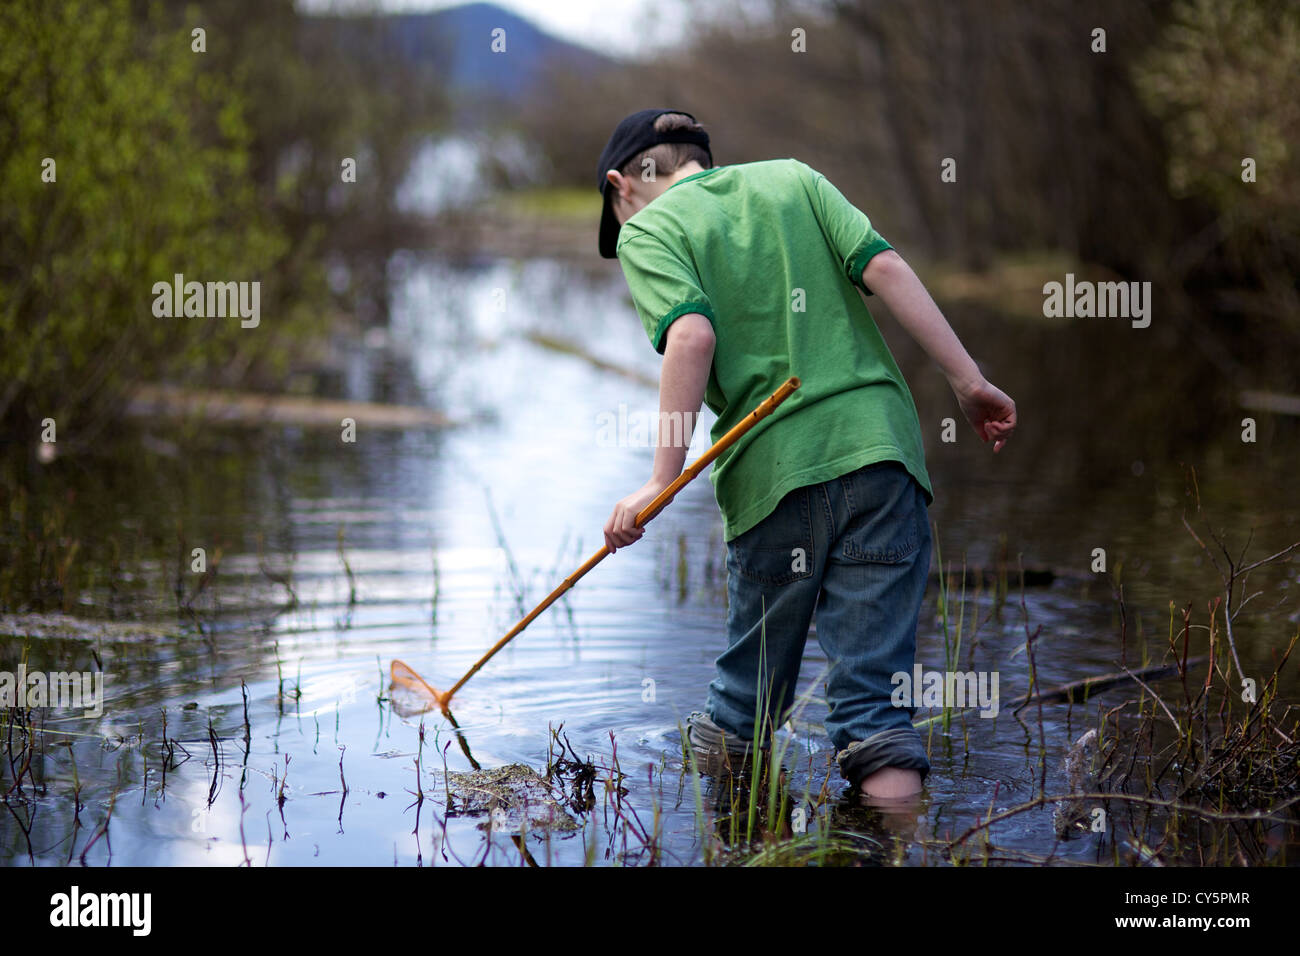 Young boy having fun catching frogs with frog net in the summer